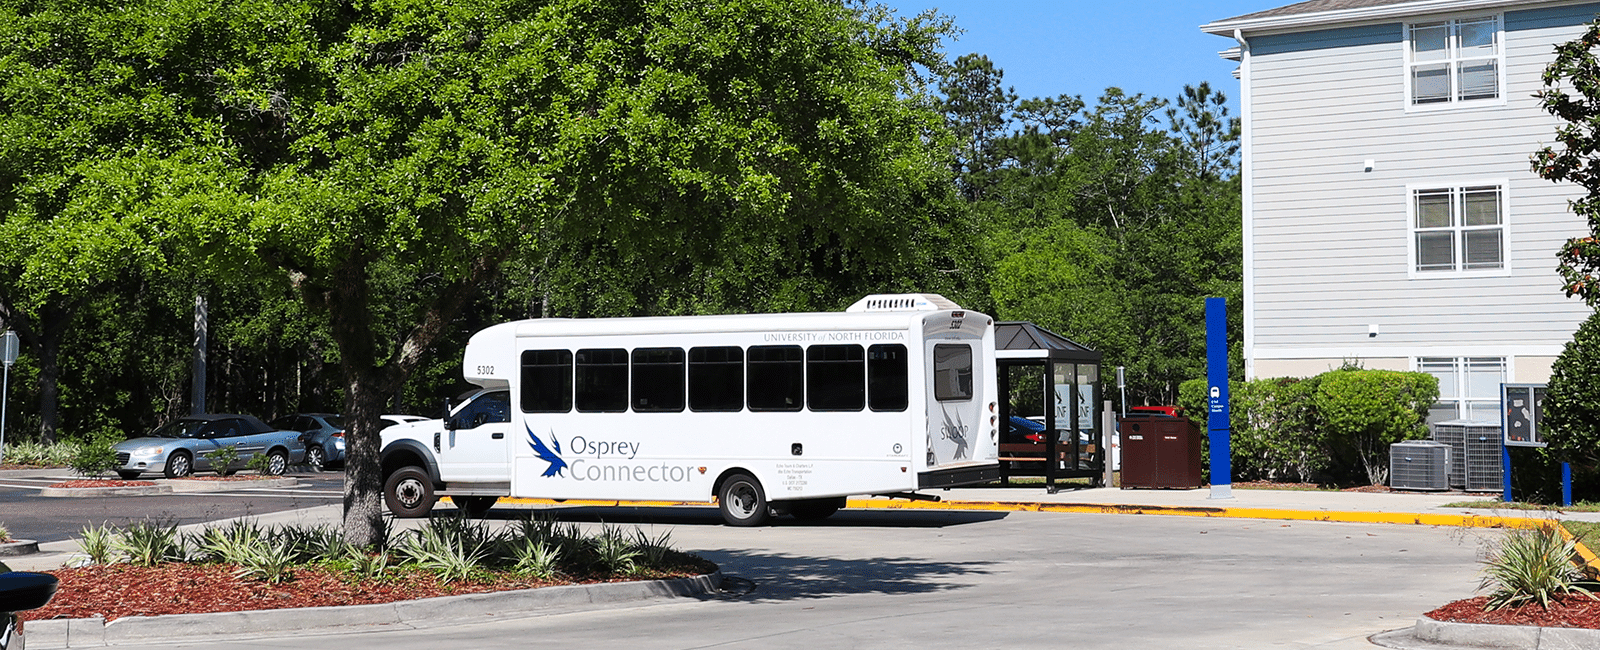 osprey shuttle at the flats at unf